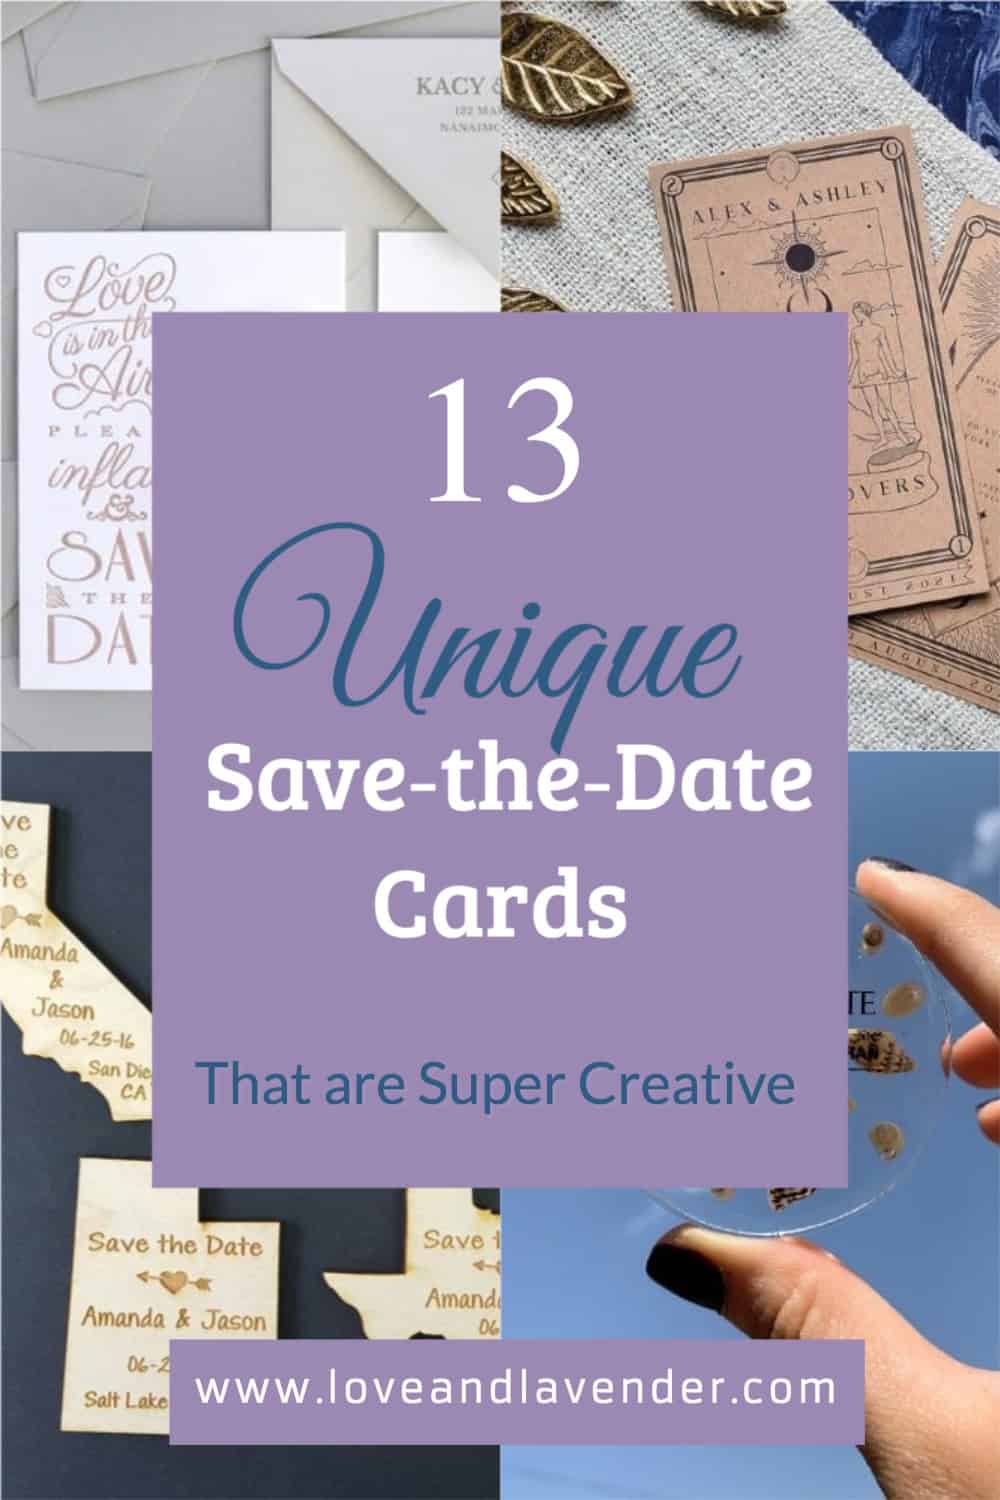 16 Unique Save-the-Date Cards that are Super Creative!